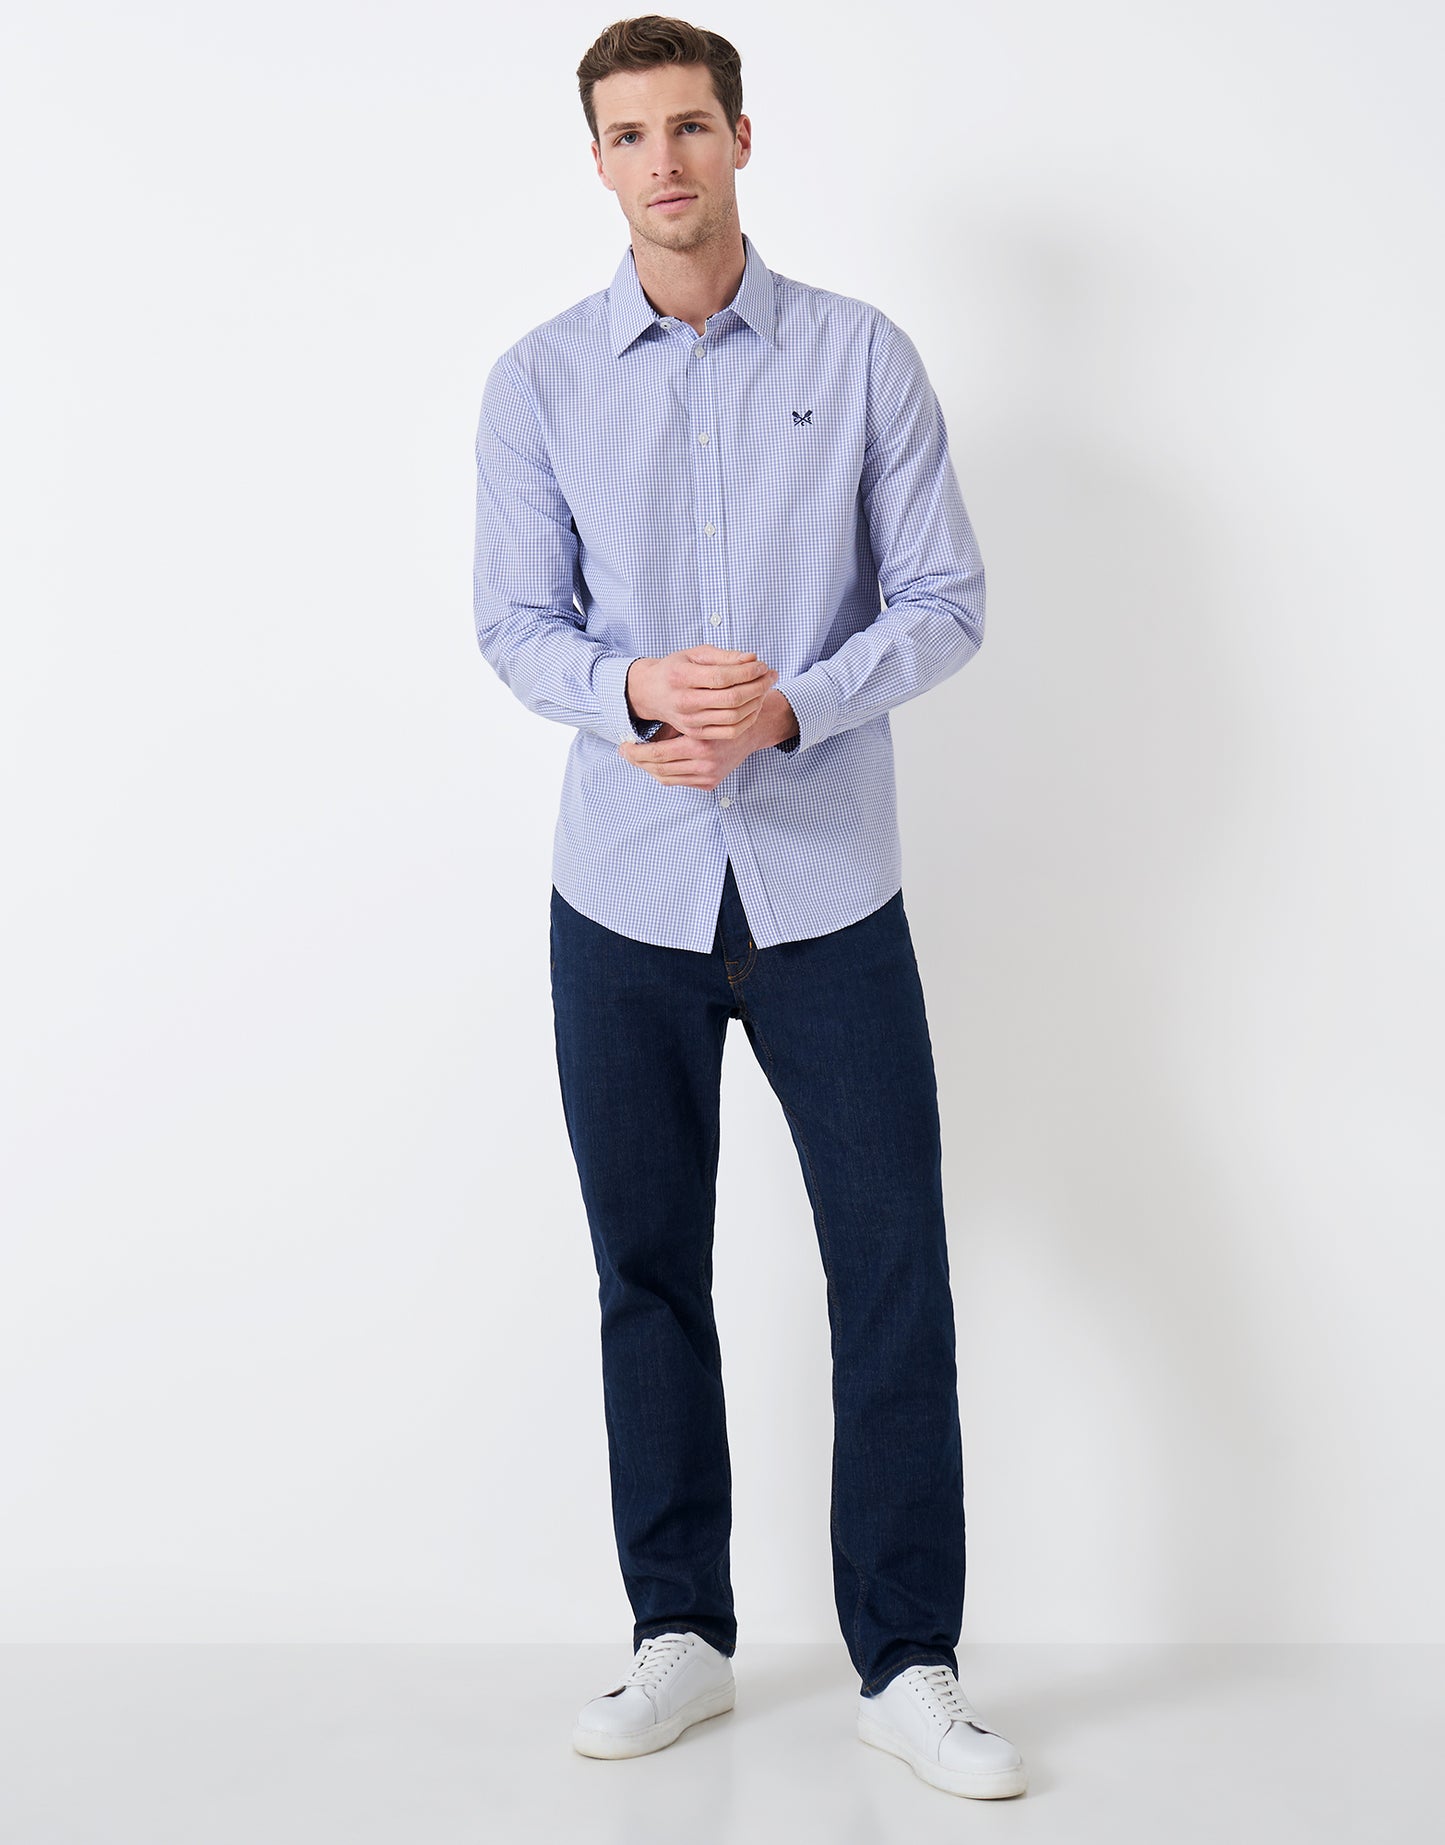 Crew Clothing Classic Fit Micro Gingham Shirt